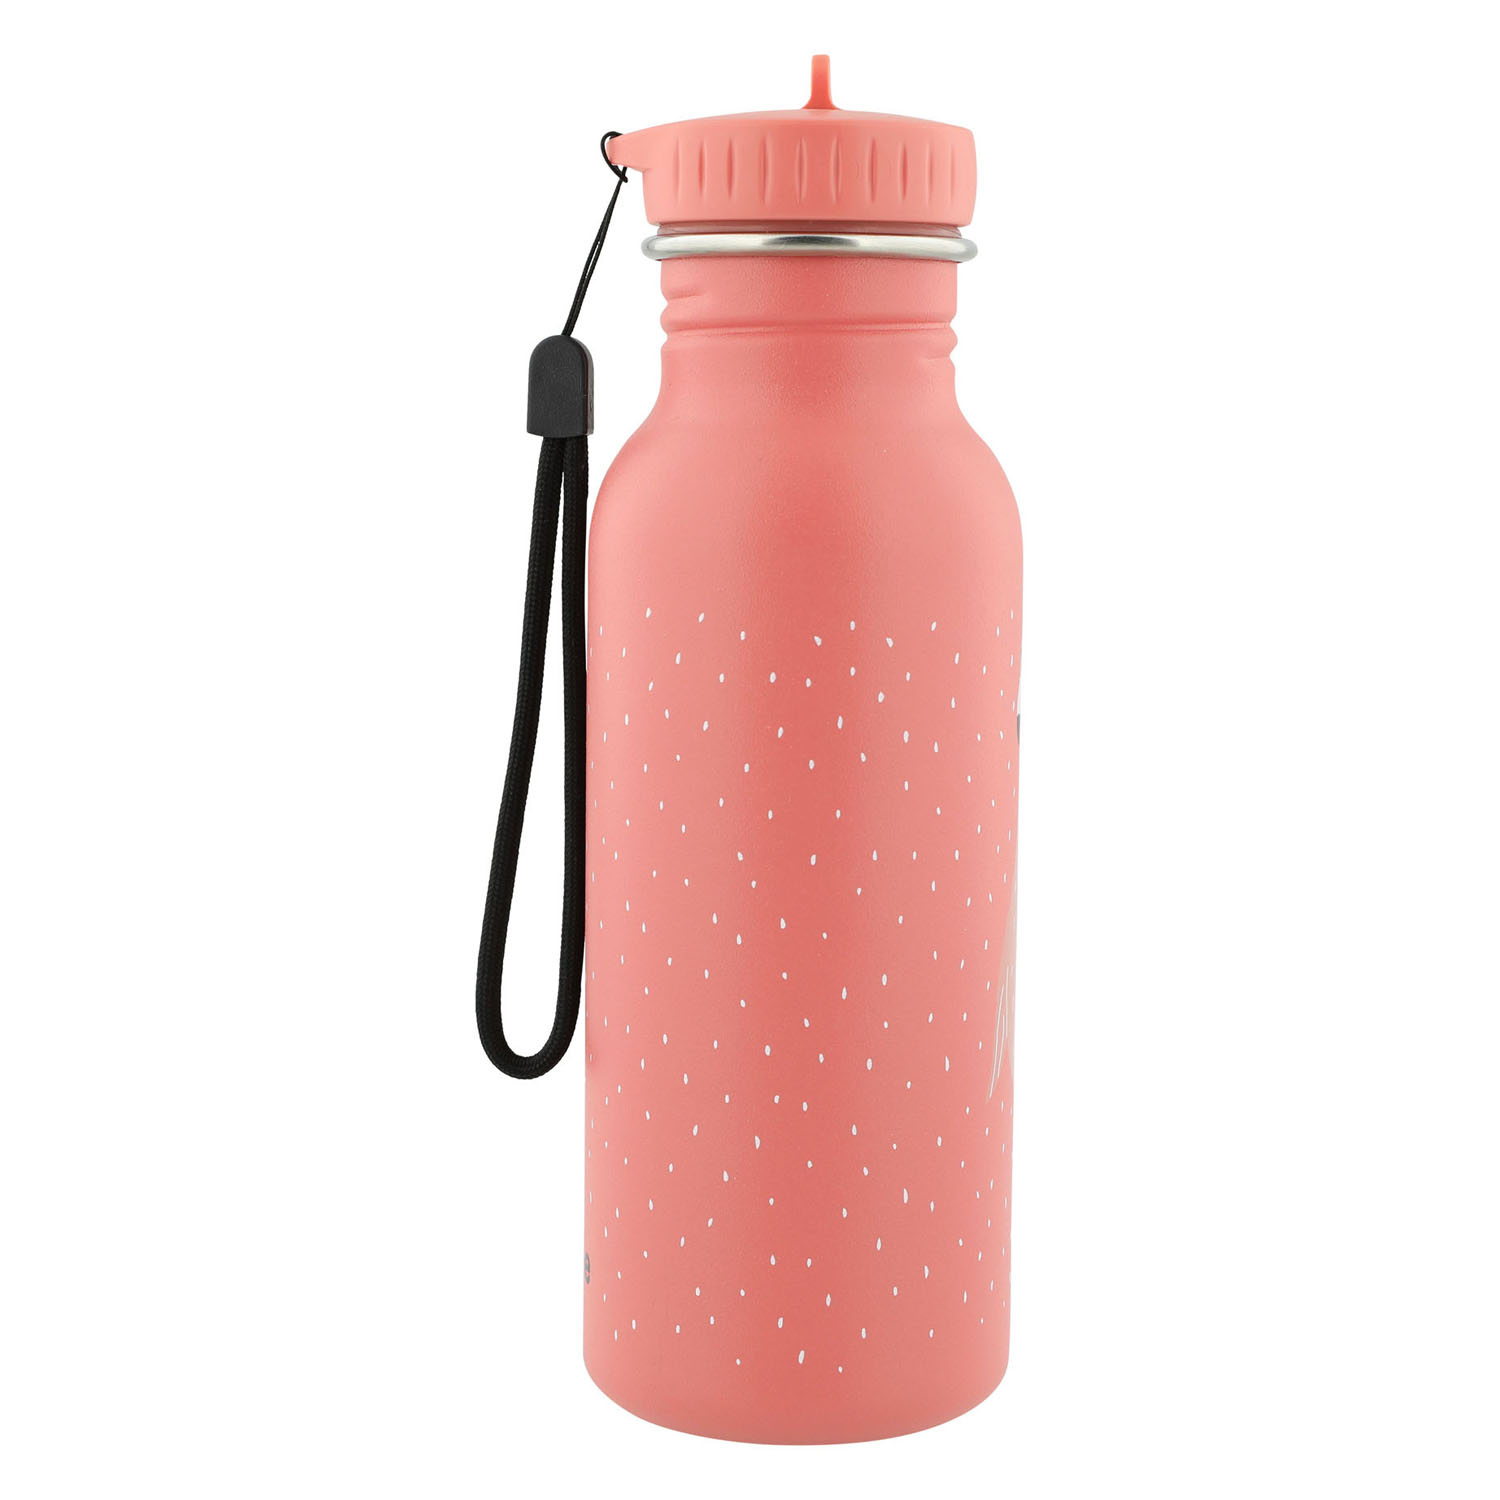 Gourde Trixie - Mme. Flamant rose, 500ml